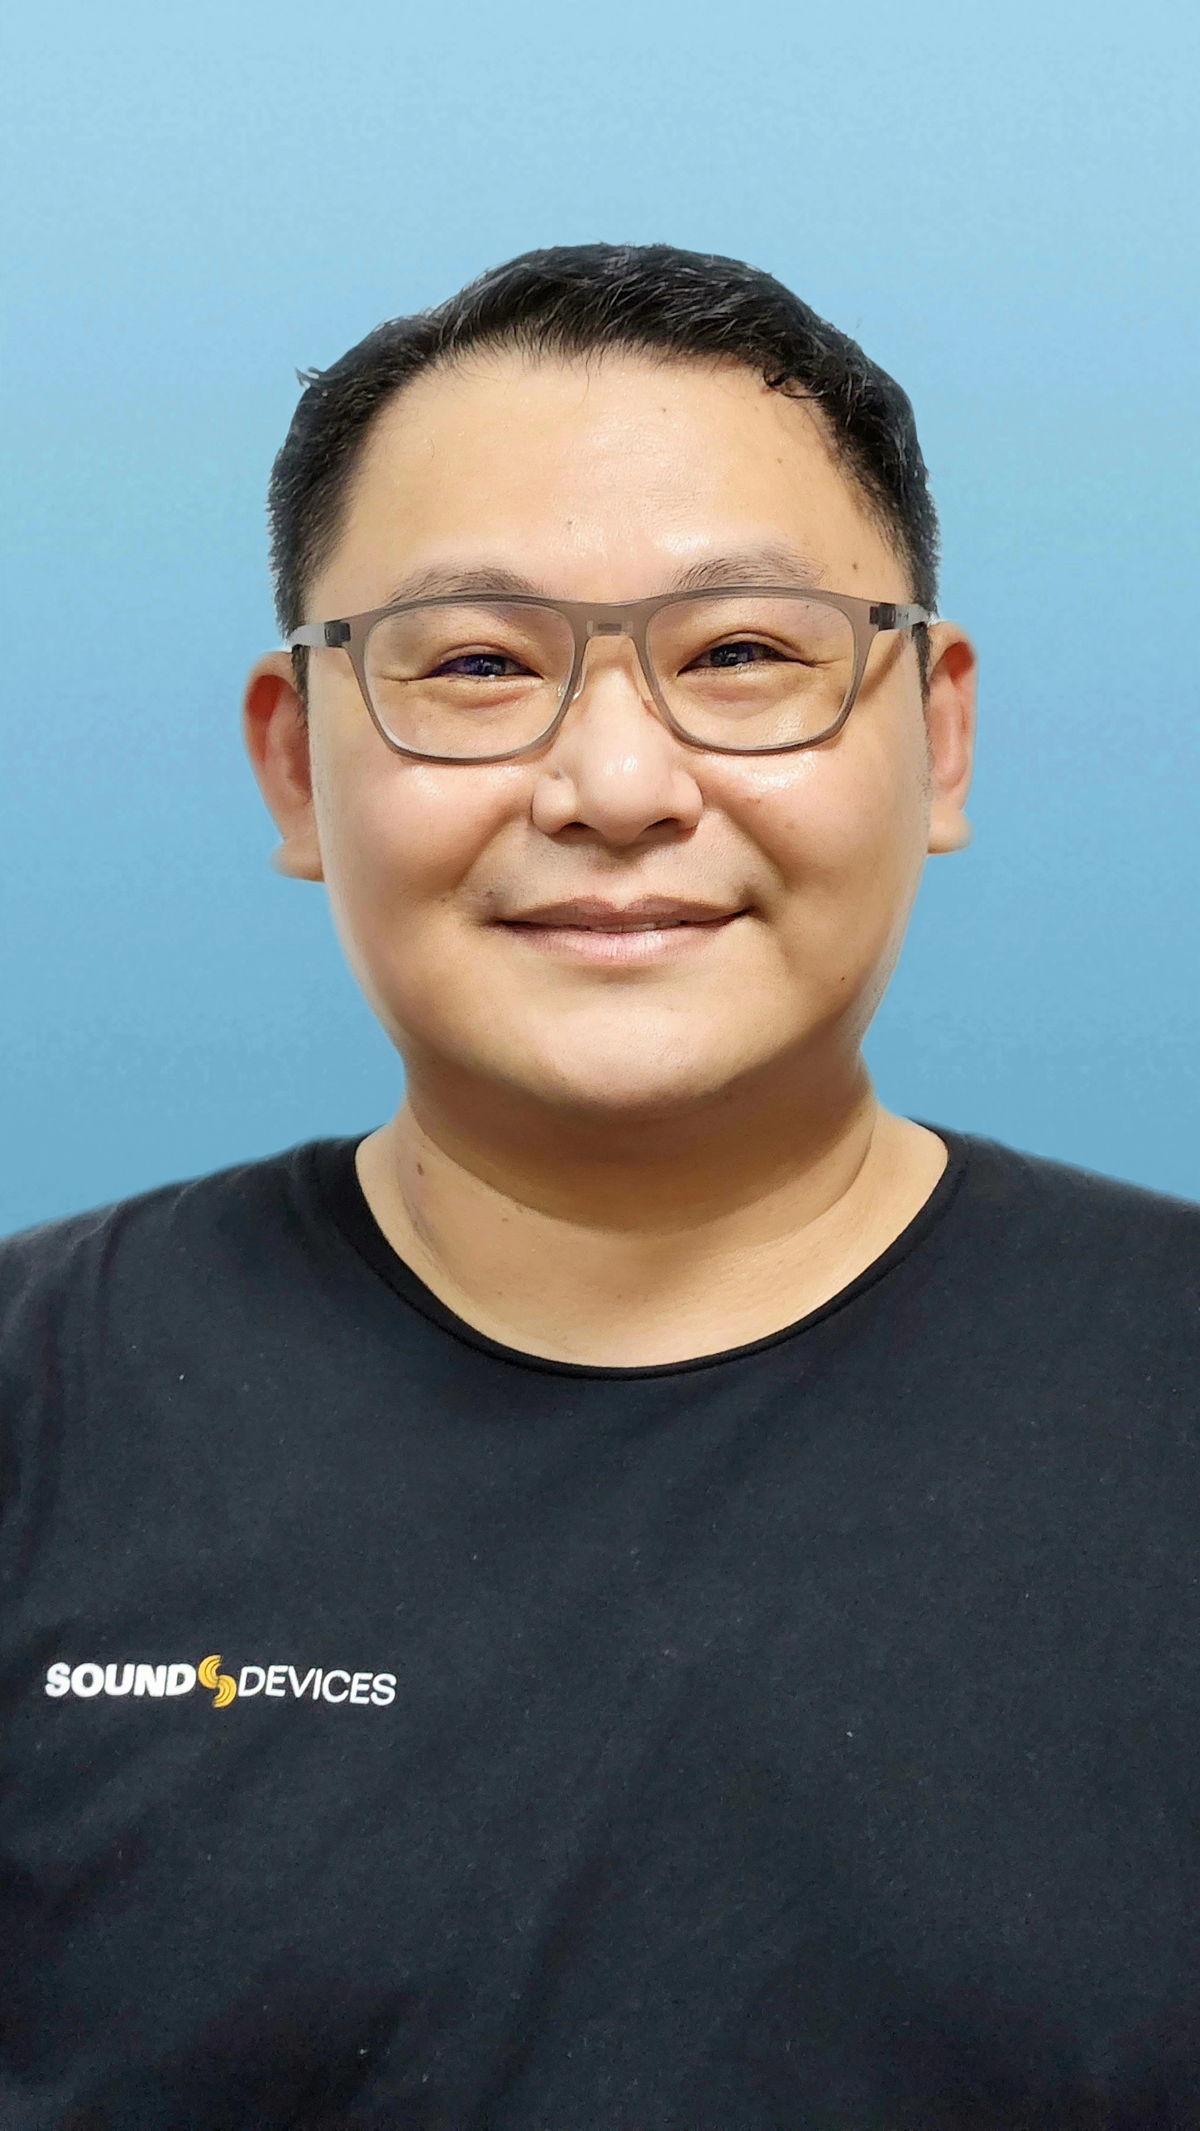 Sound Devices APAC Sales Manager Bryan Lee